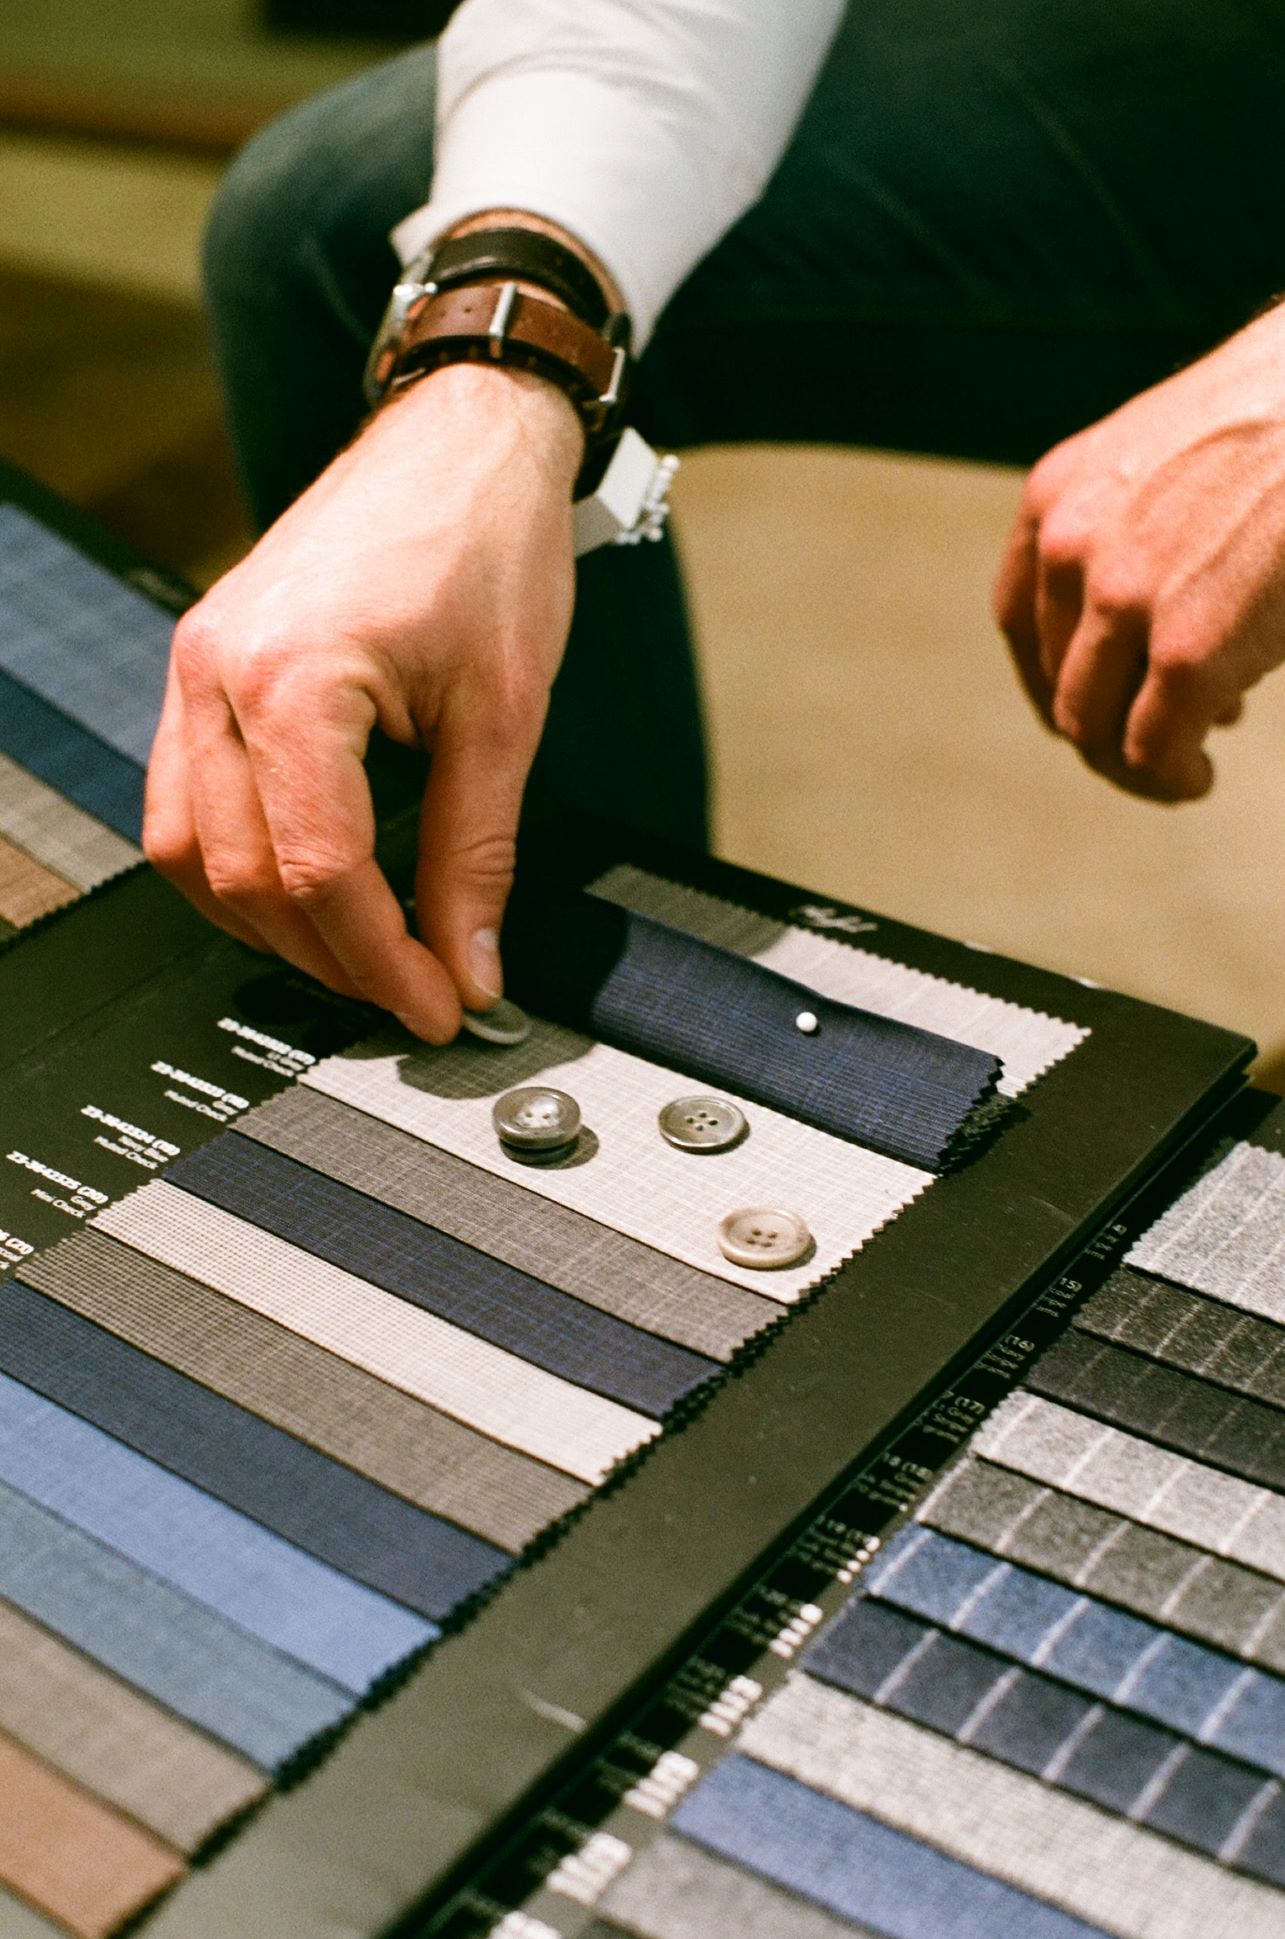 An image of someone choosing a color for their tuxedo from color swatches. 